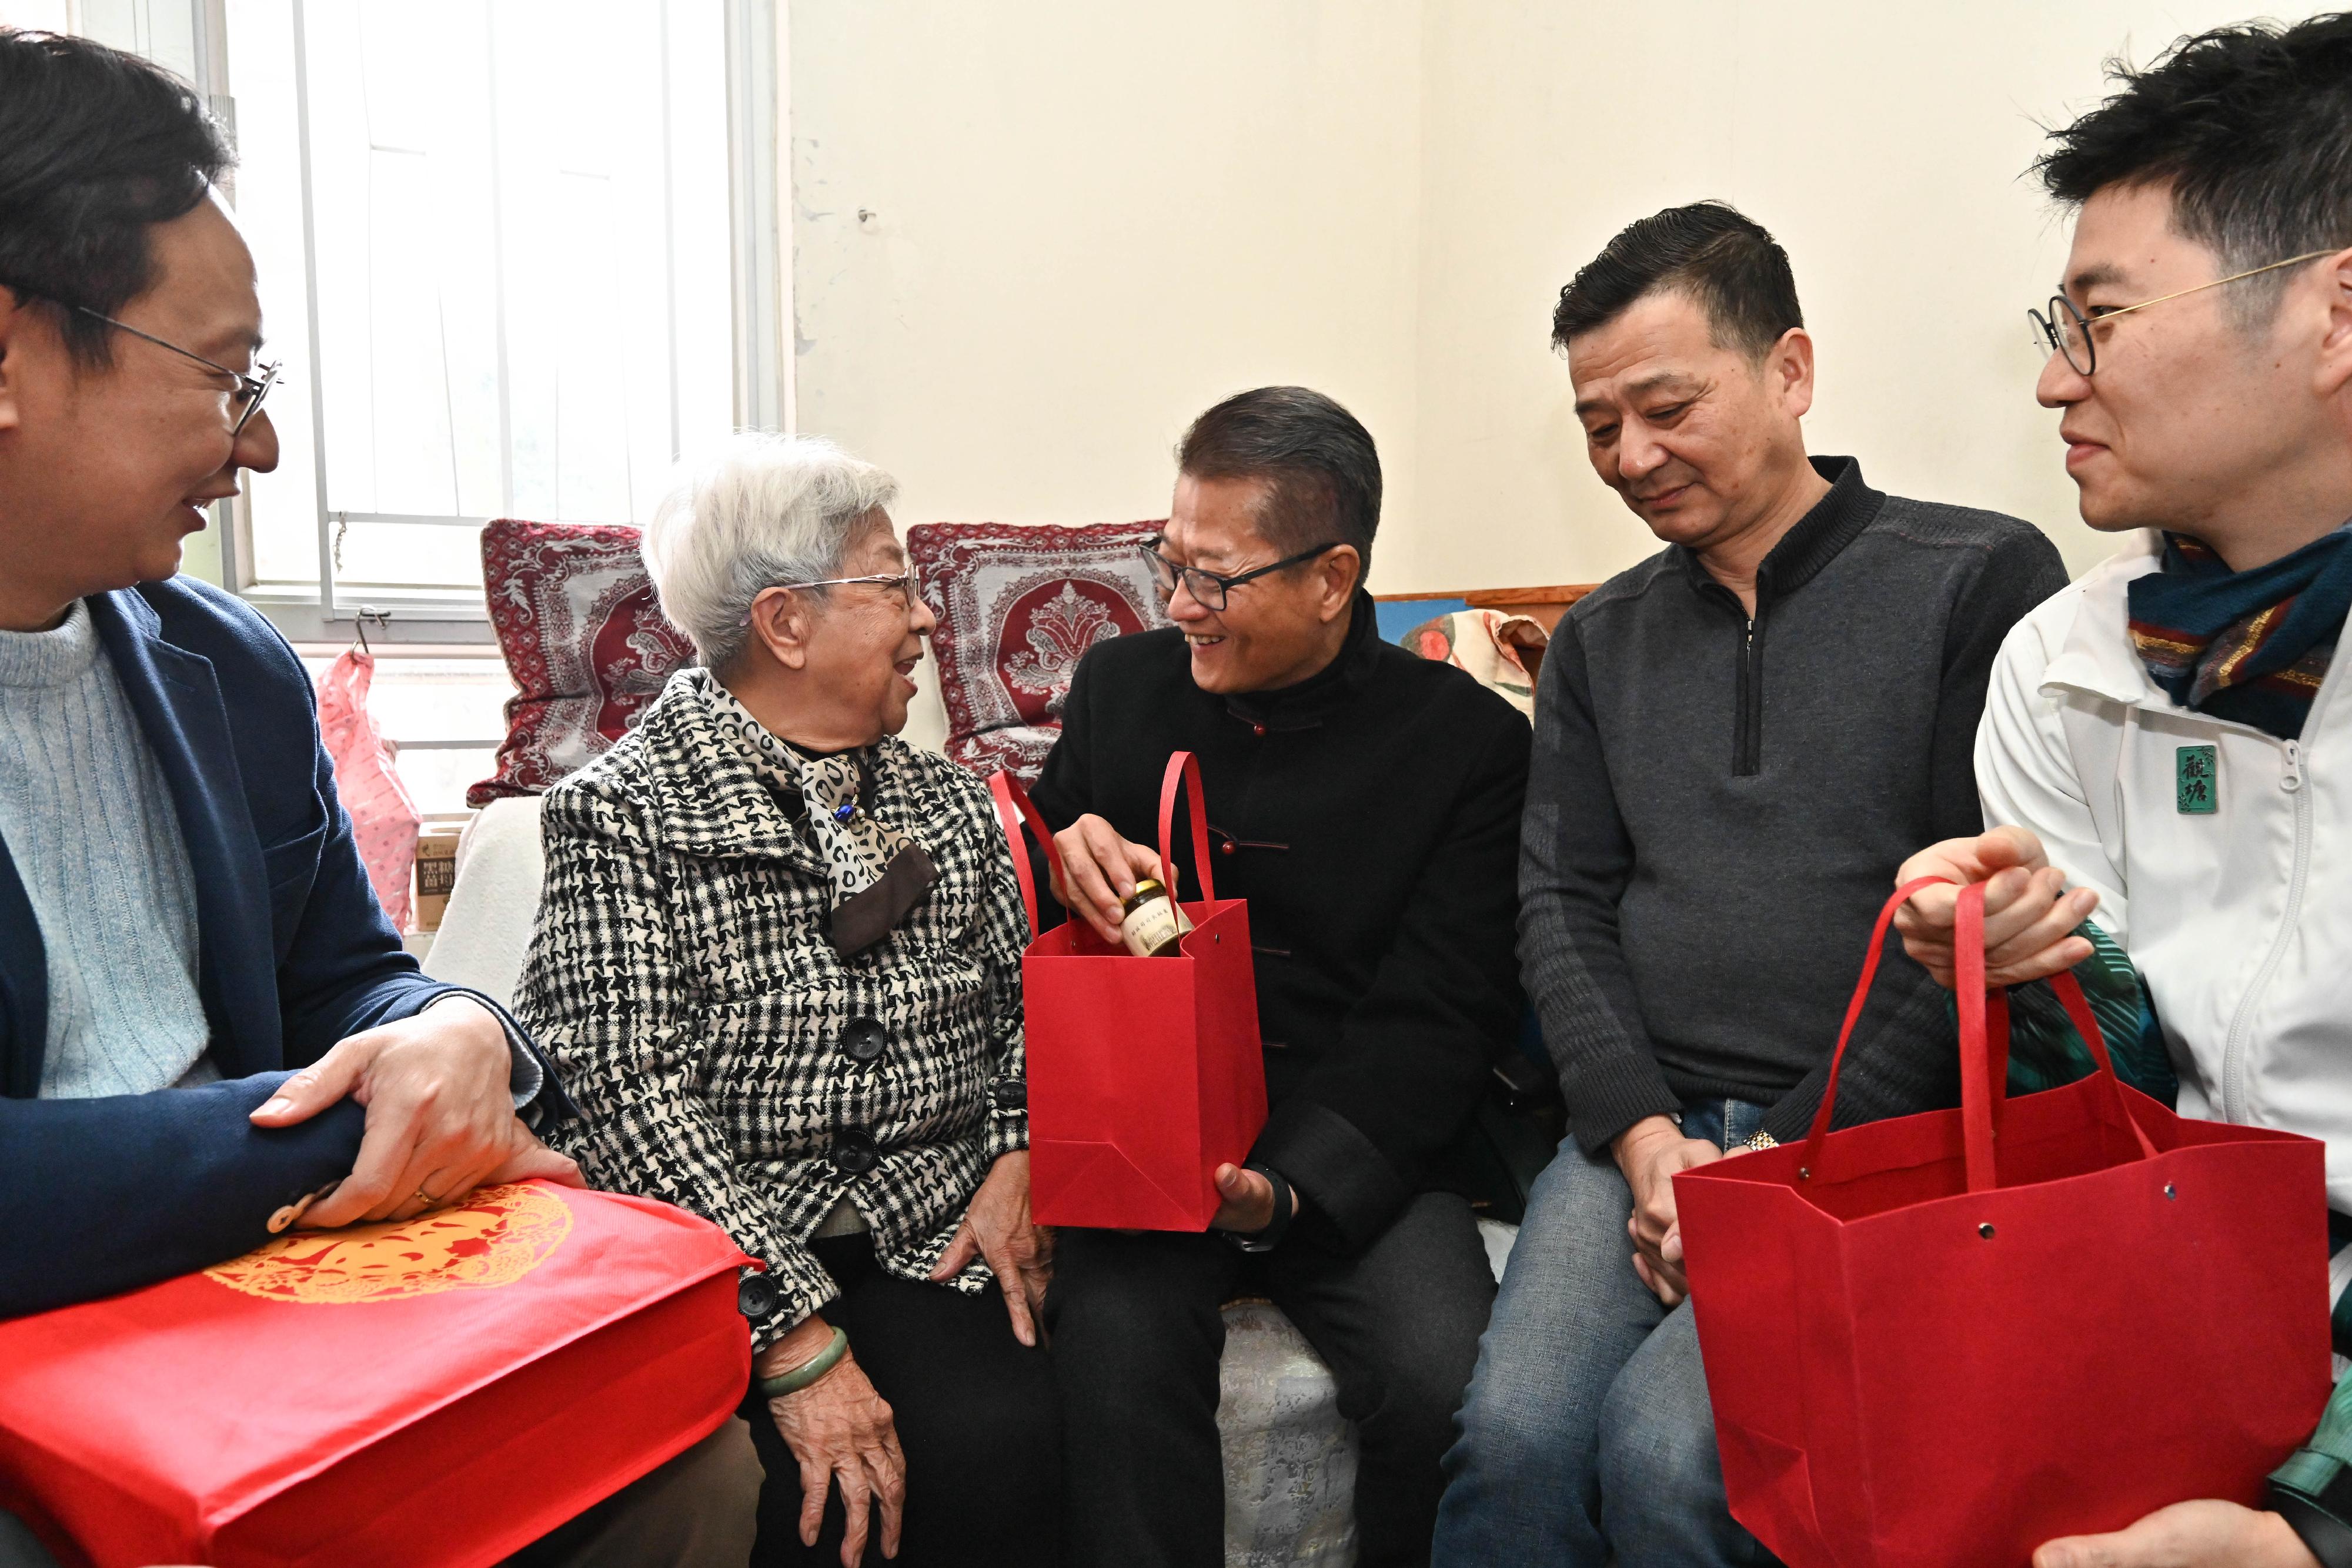 The Financial Secretary, Mr Paul Chan (centre), accompanied by the District Officer (Kwun Tong), Mr Denny Ho (first right), visits elderly people living in Tak Tin Estate, Lam Tin, today (February 9) and gives blessing bags to them.